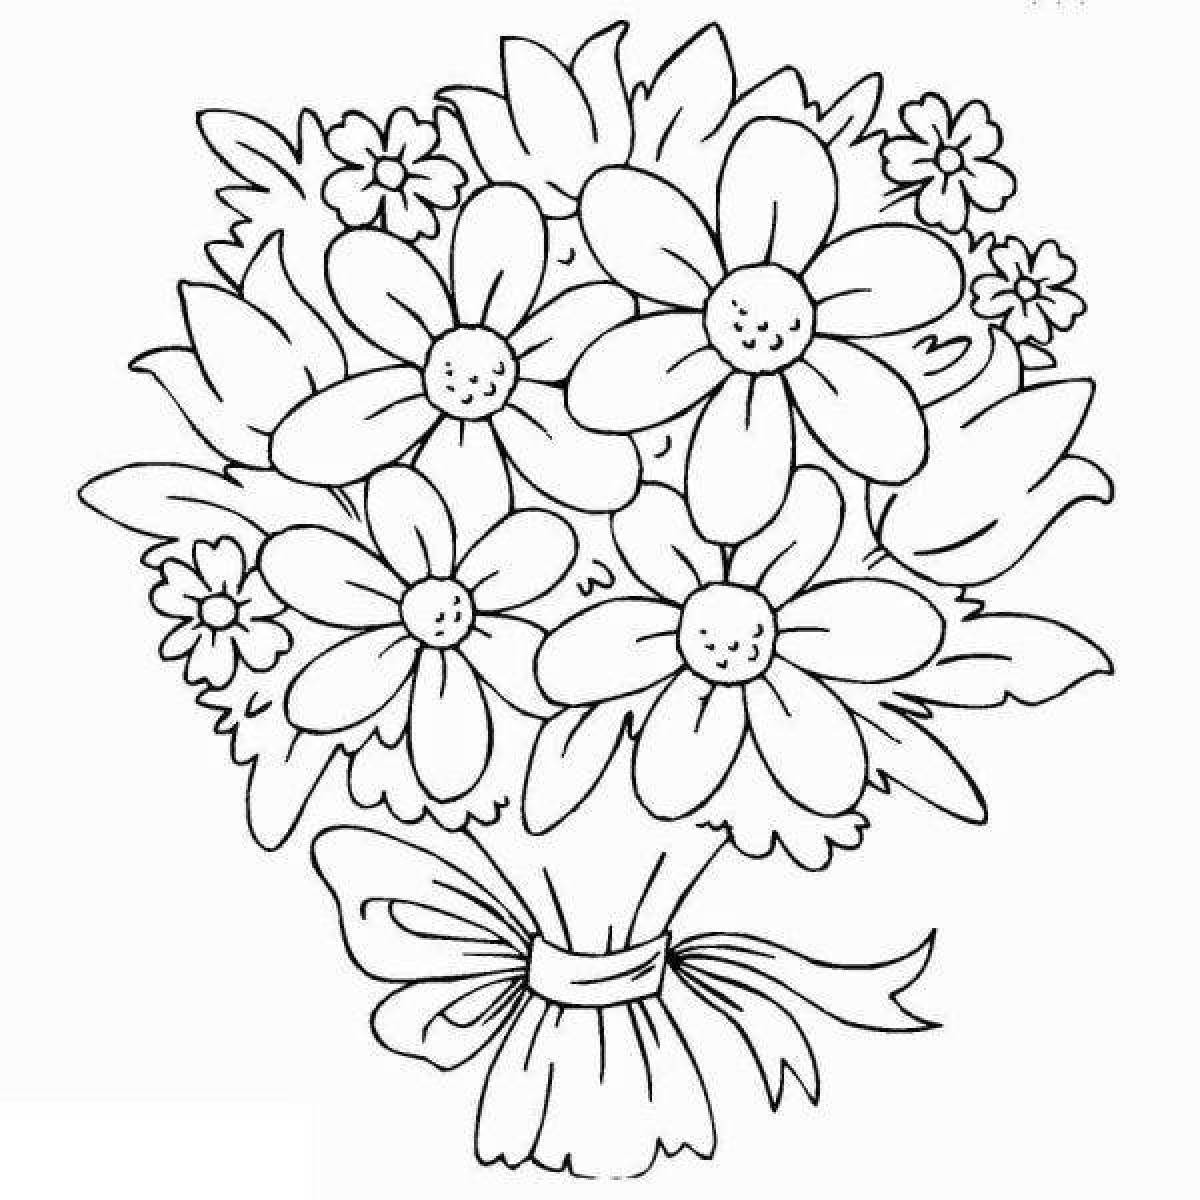 Rampant coloring beautiful large bouquets of flowers